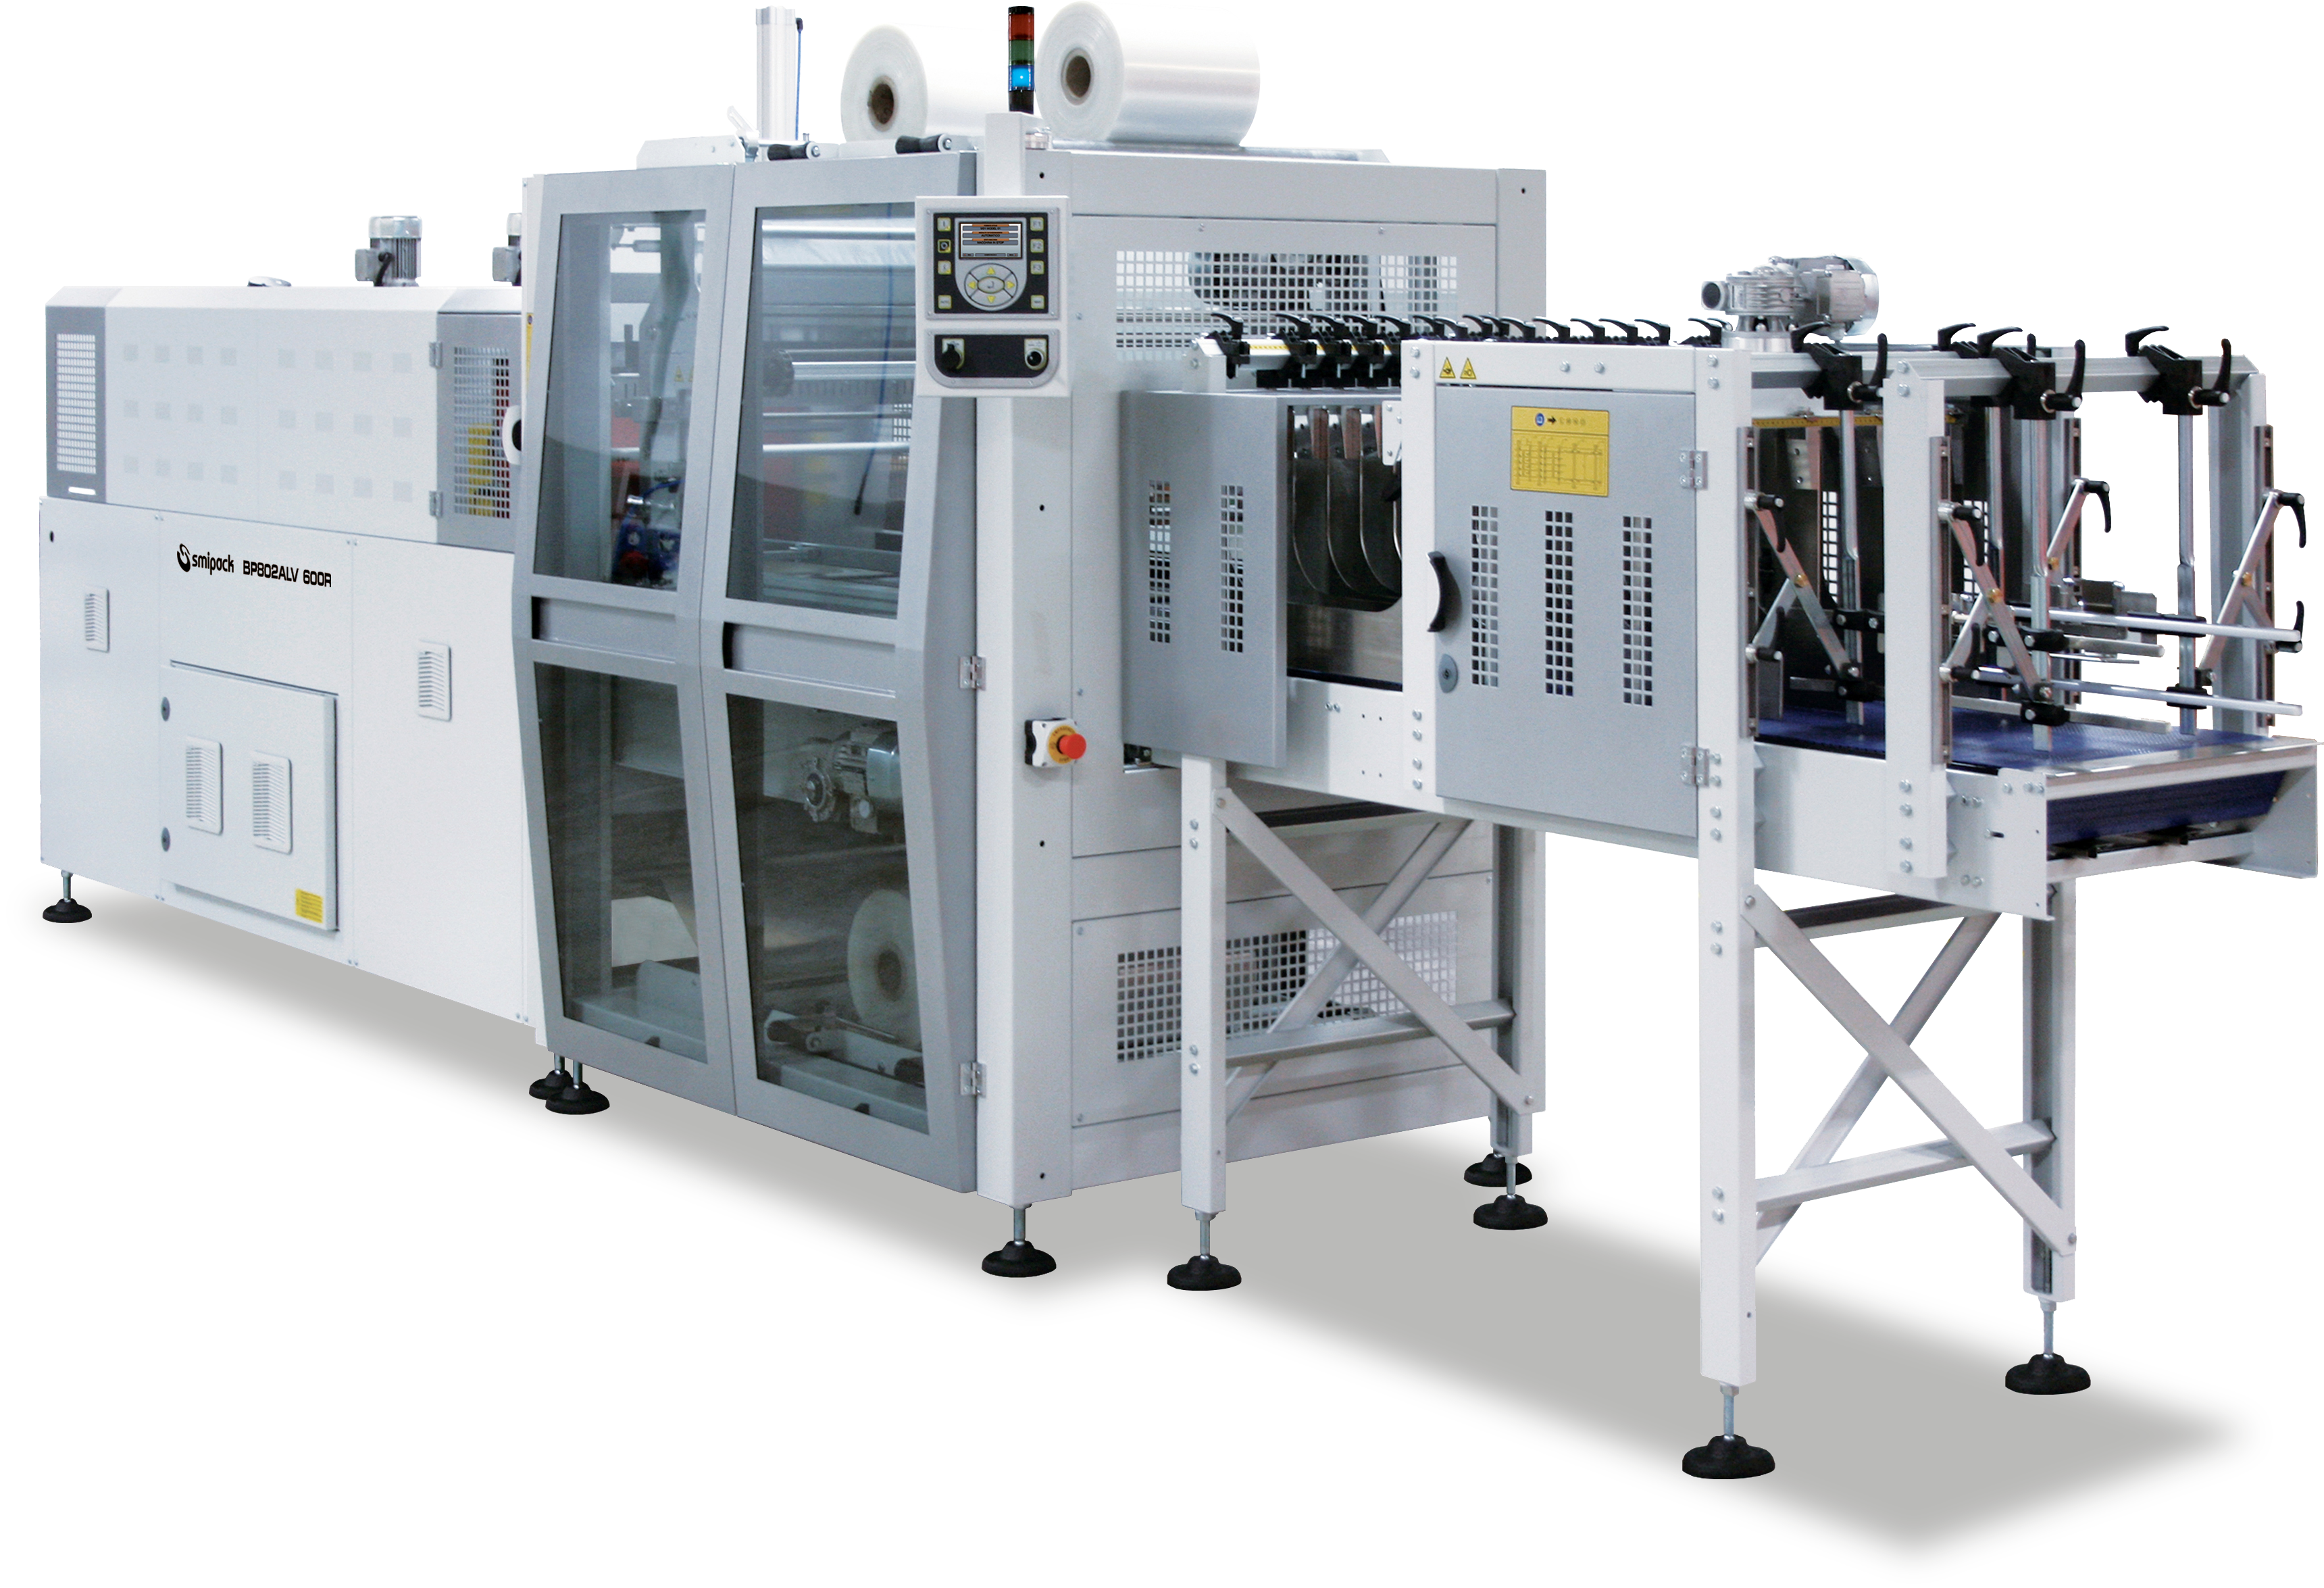 pwb-smi-017, Bundle Wrapper In-line (Collation, Sorting), Bundle Wrappers from Astrolift